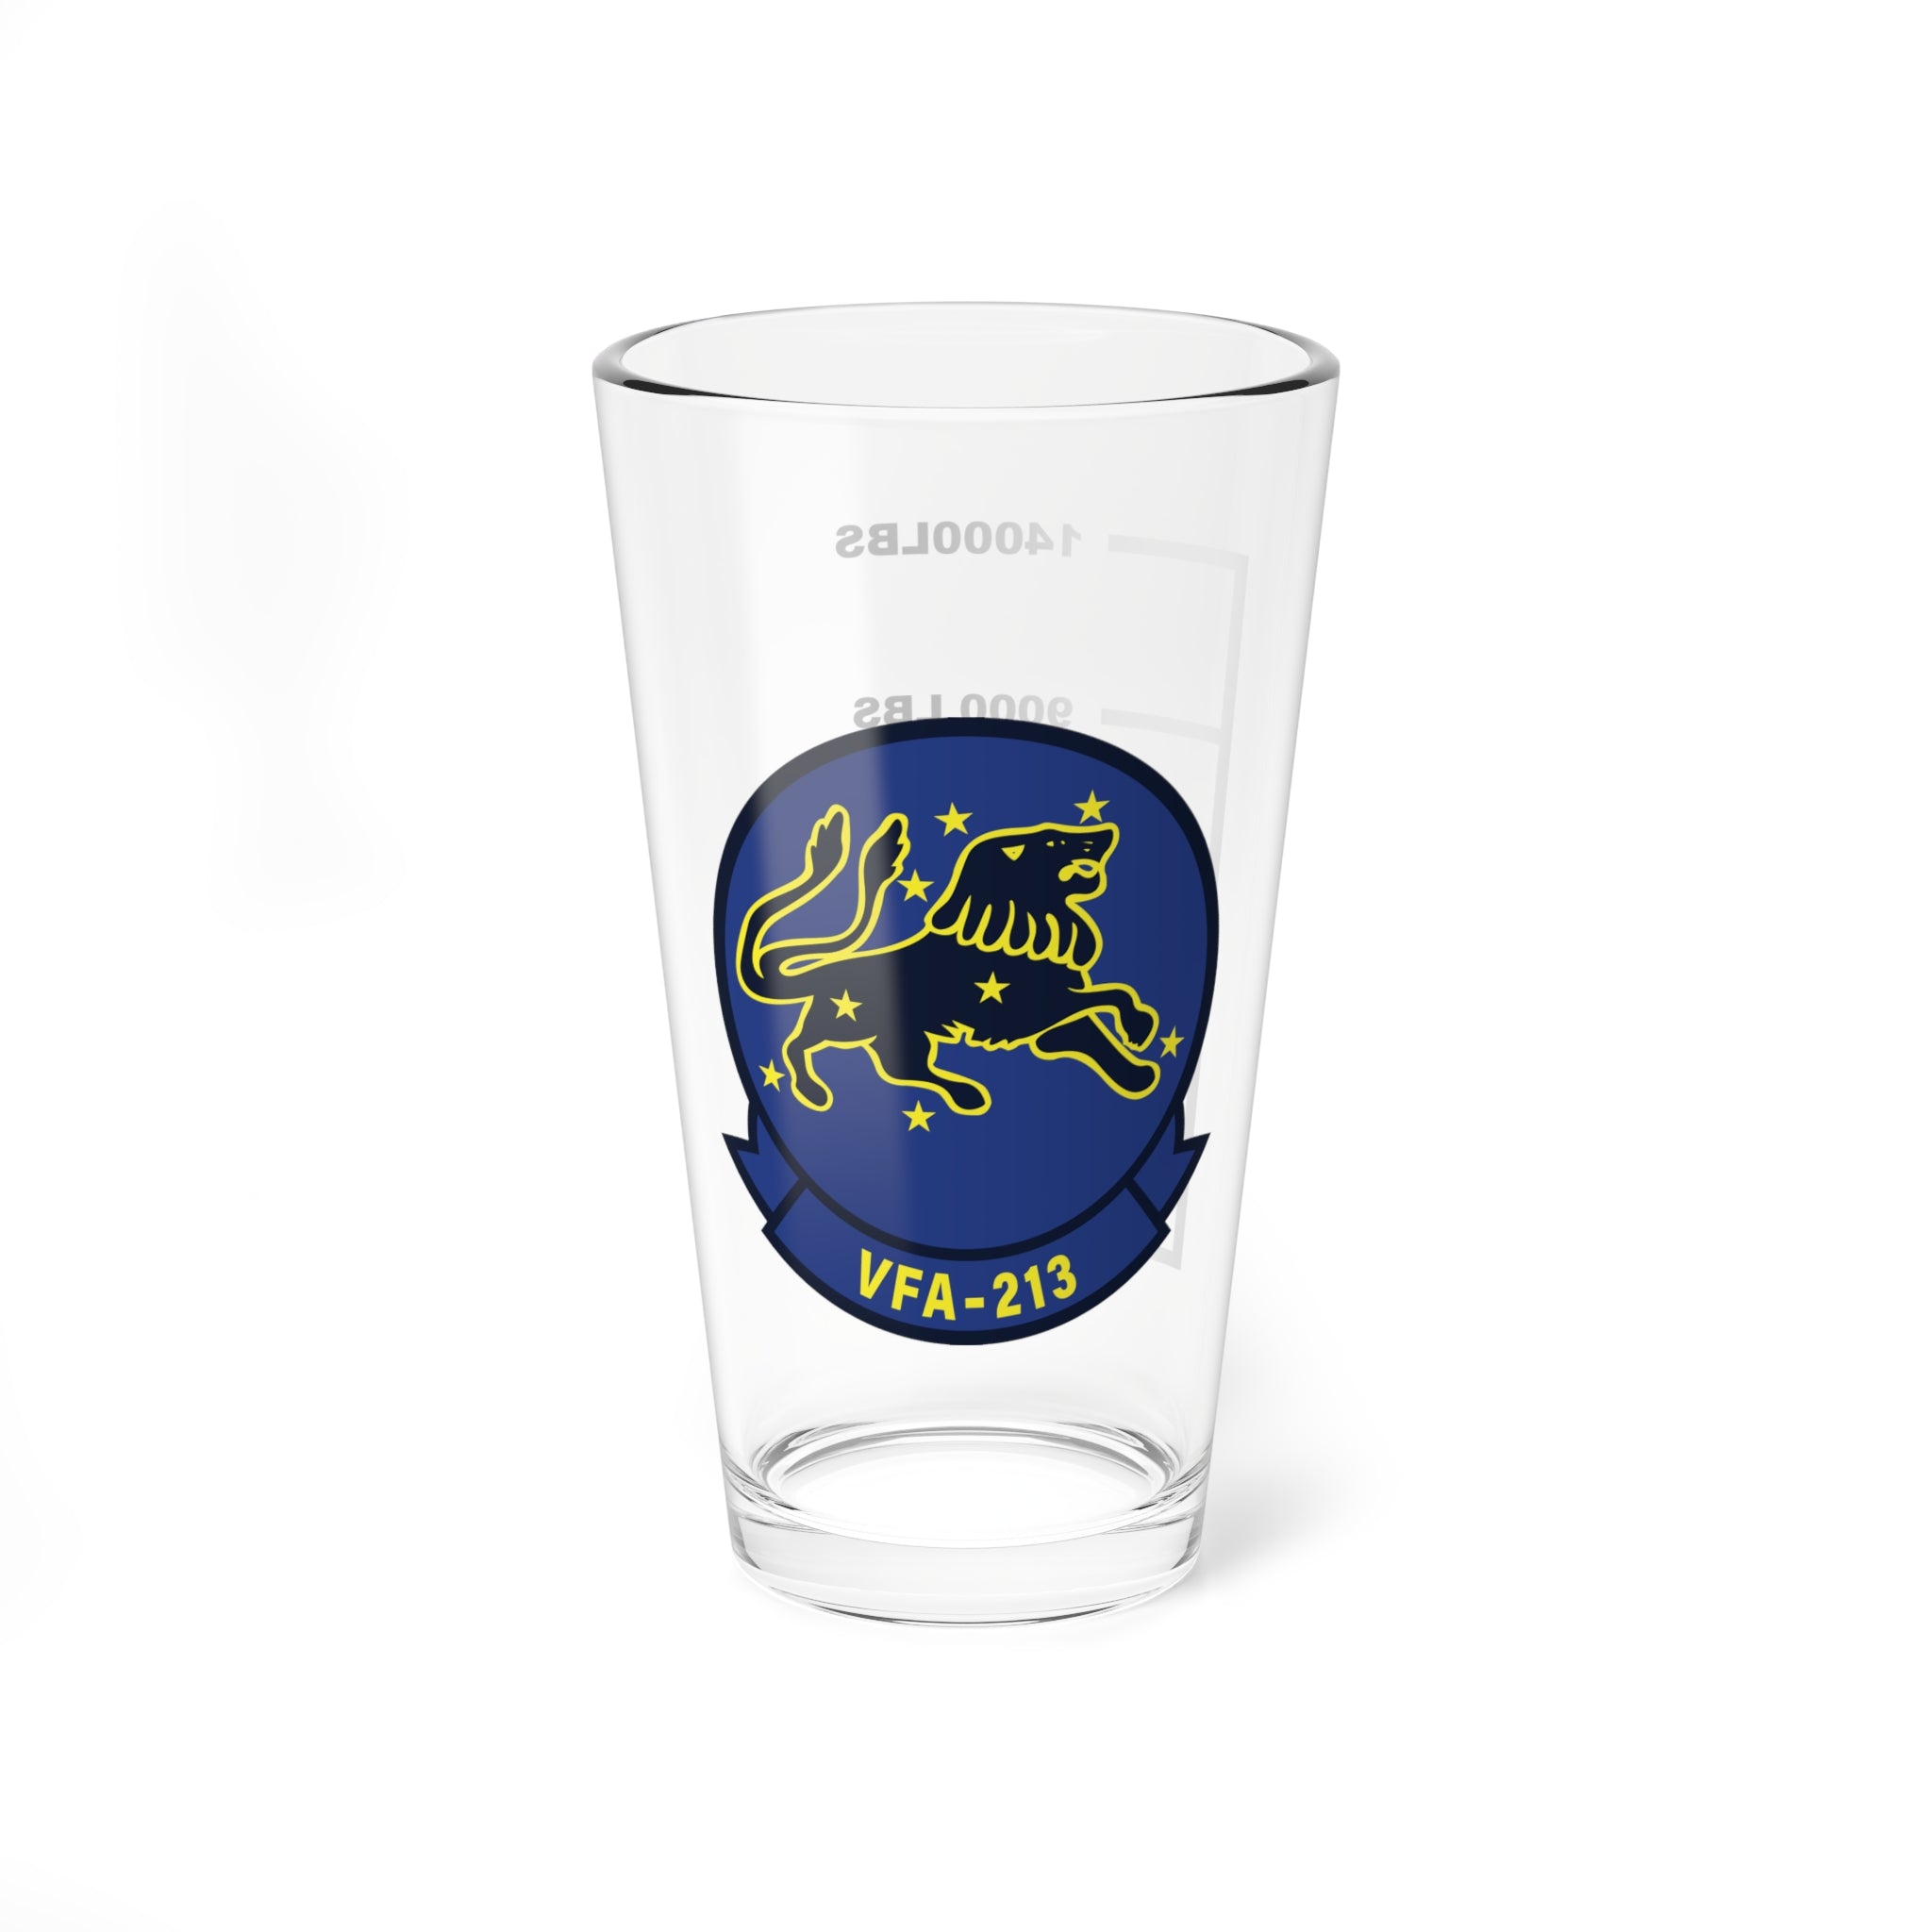 VFA-213 "Blacklions" Fuel Low Pint Glass, Navy Strike Fighter Squadron flying the F/A-18 Hornet